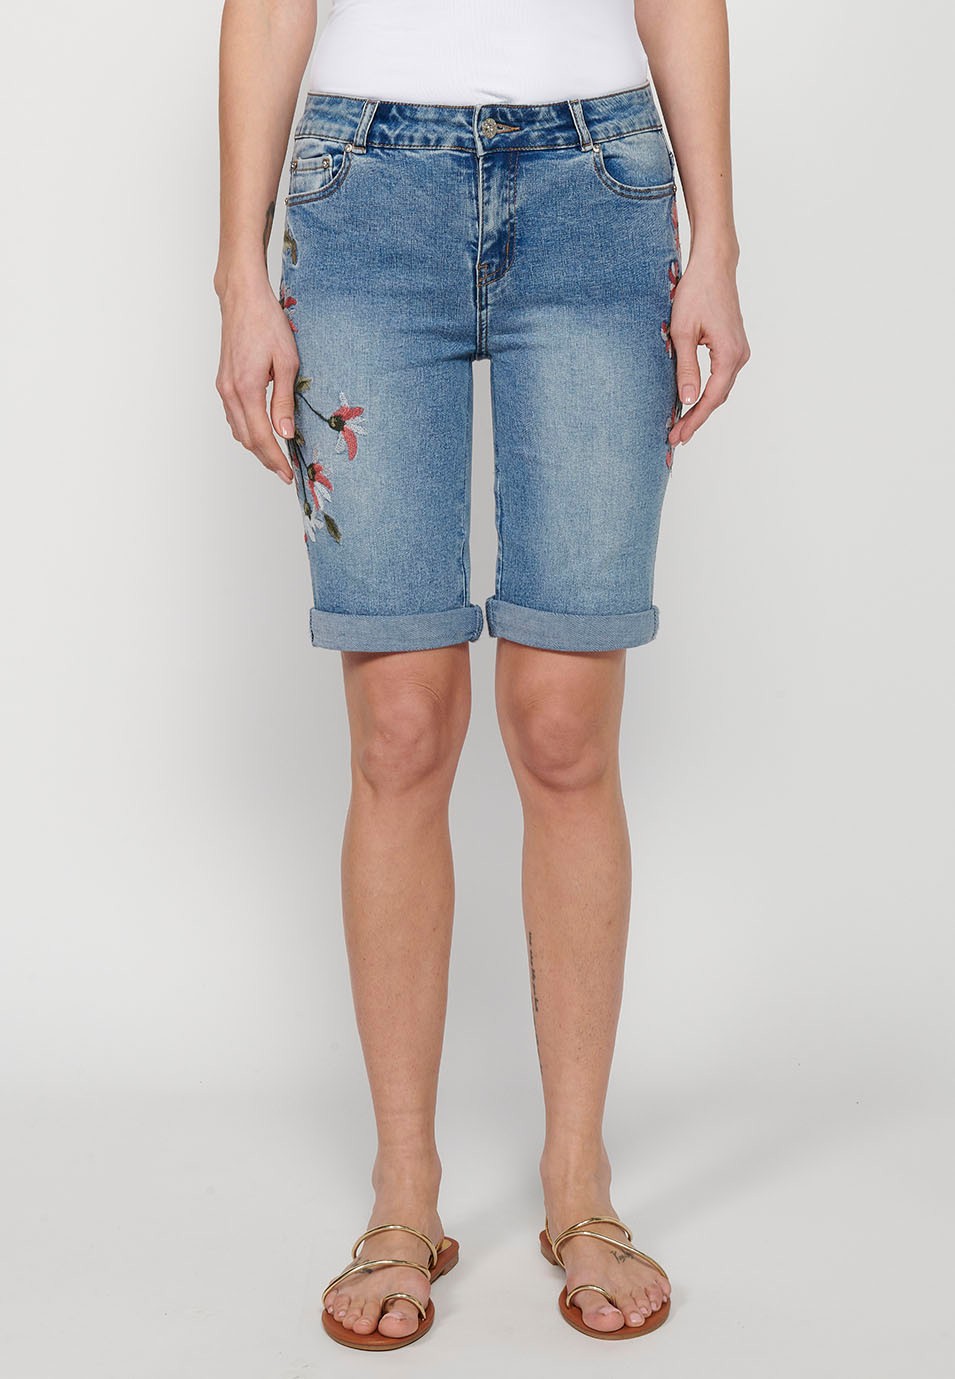 Shorts with floral embroidery, blue color for women